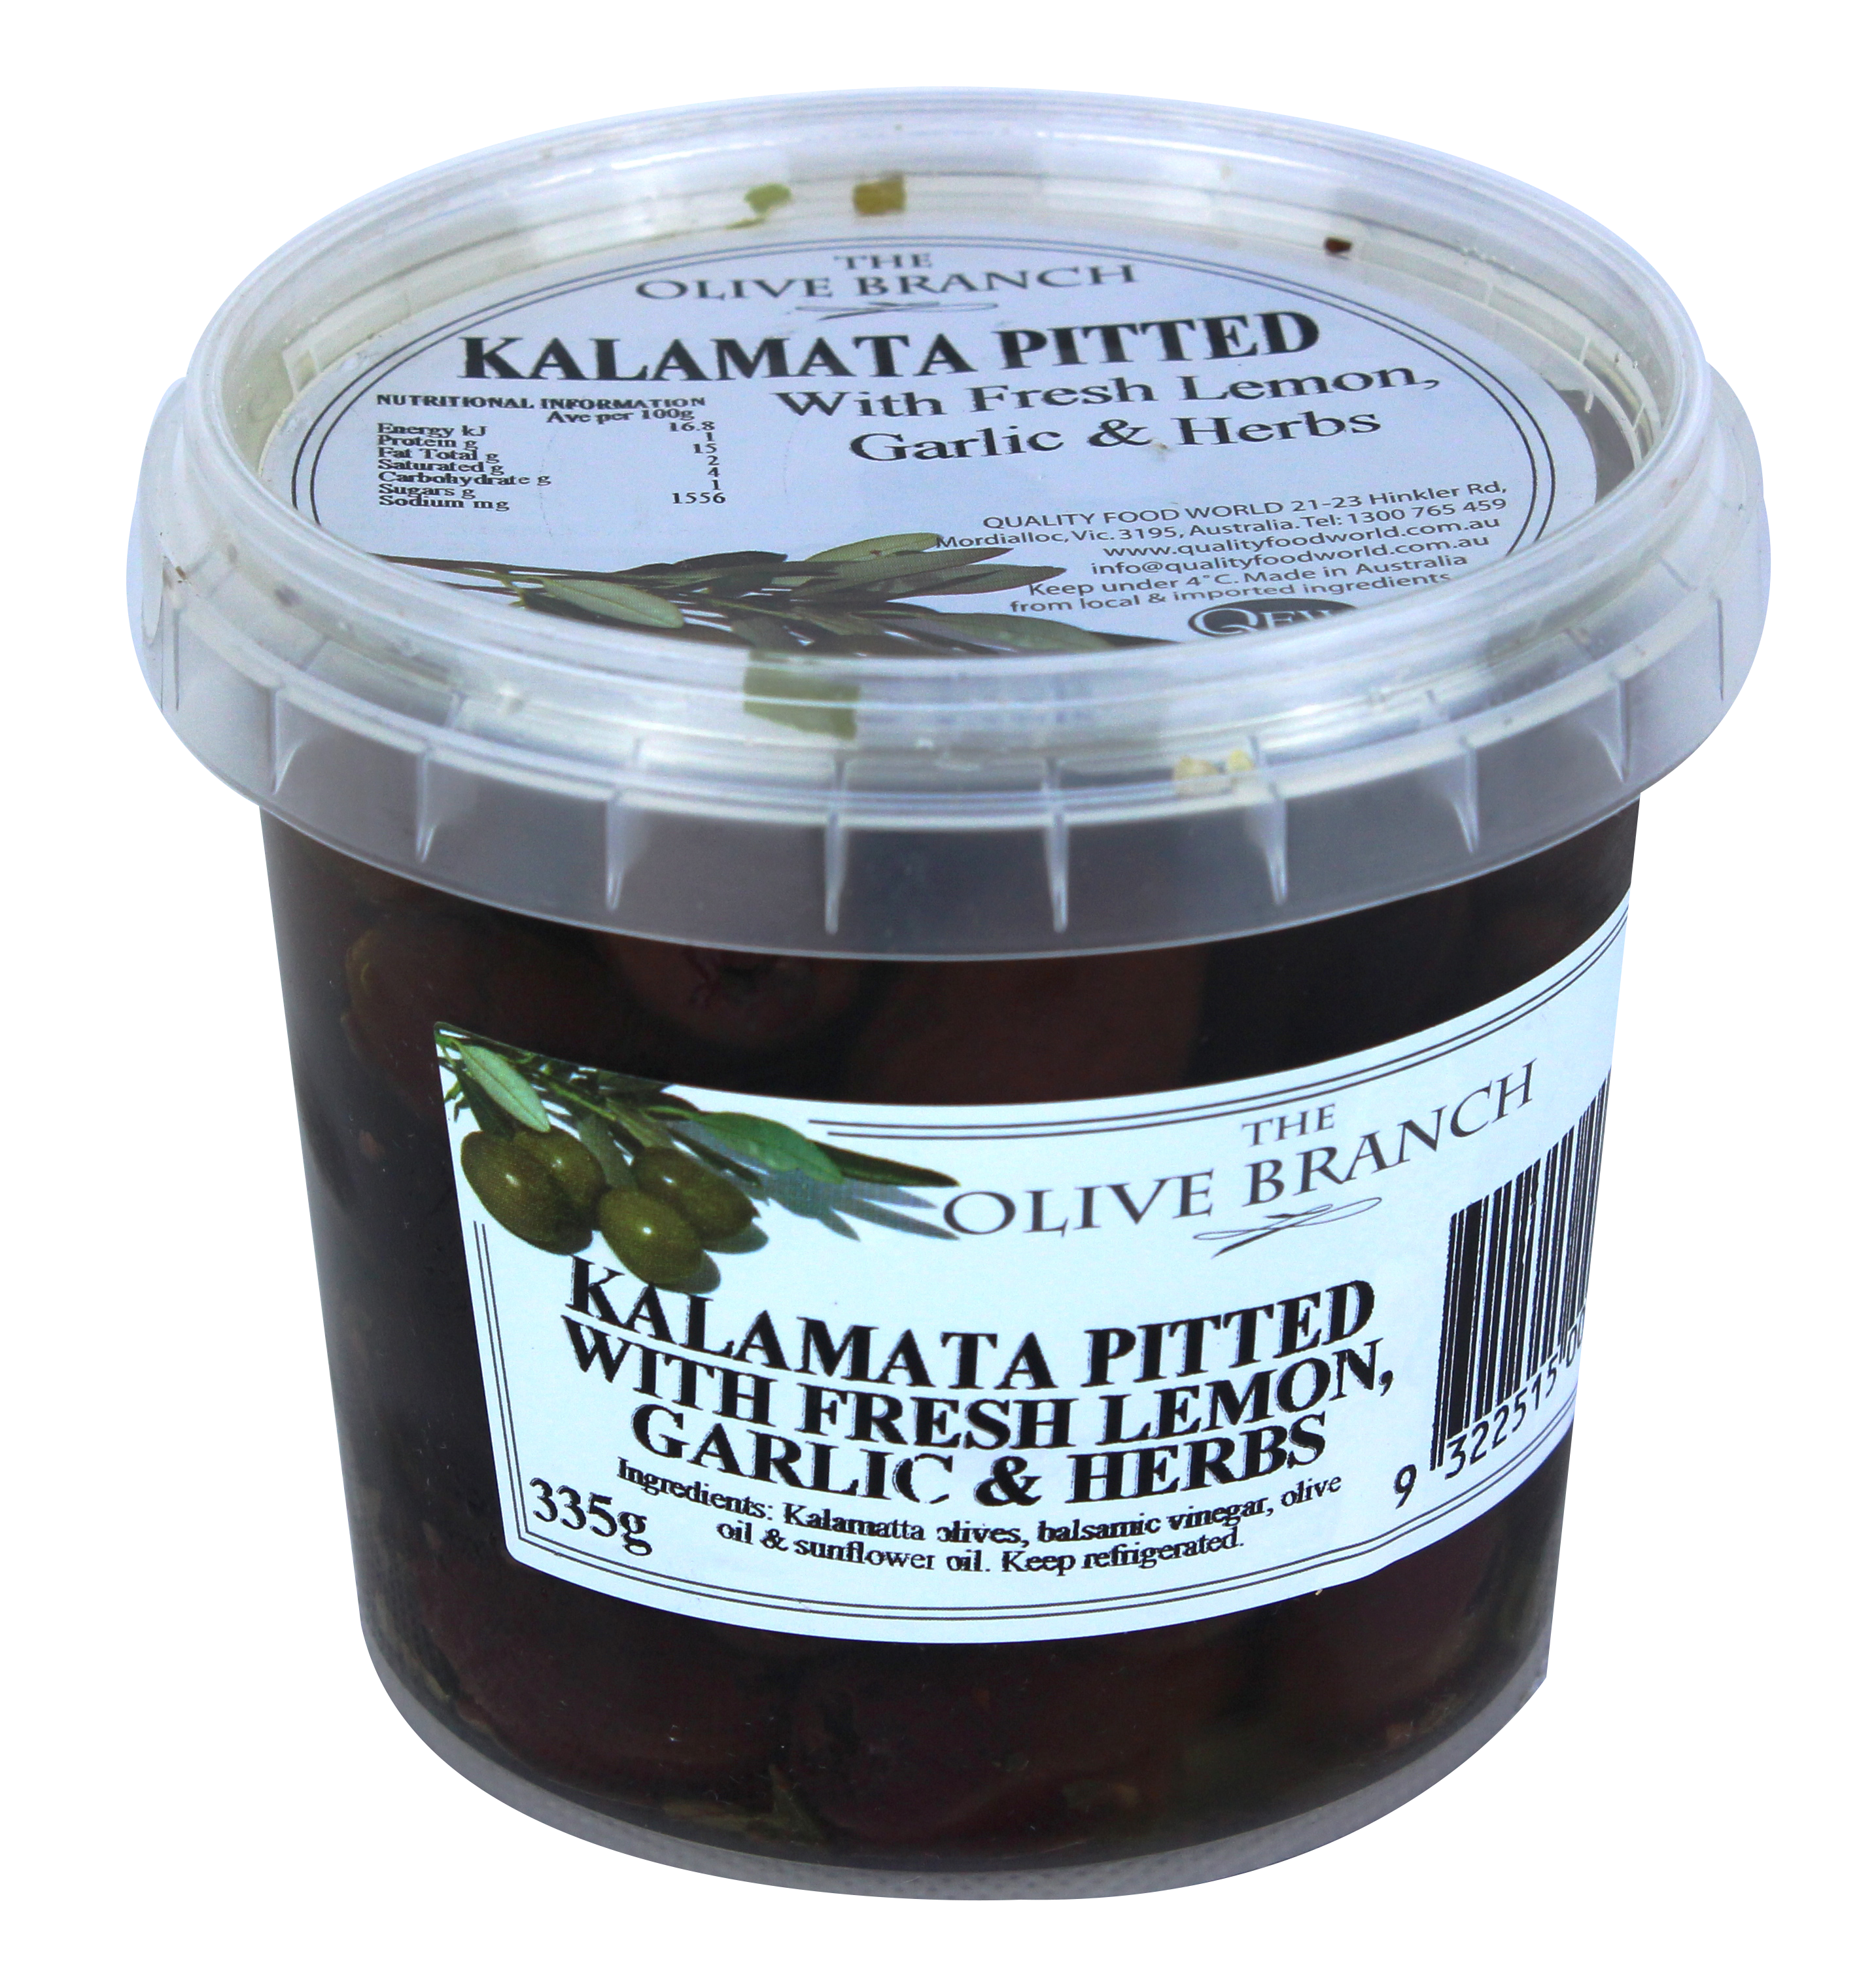 The Olive Branch Kalamata Pitted Olives with Lemon, Garlic, Herbs 335g